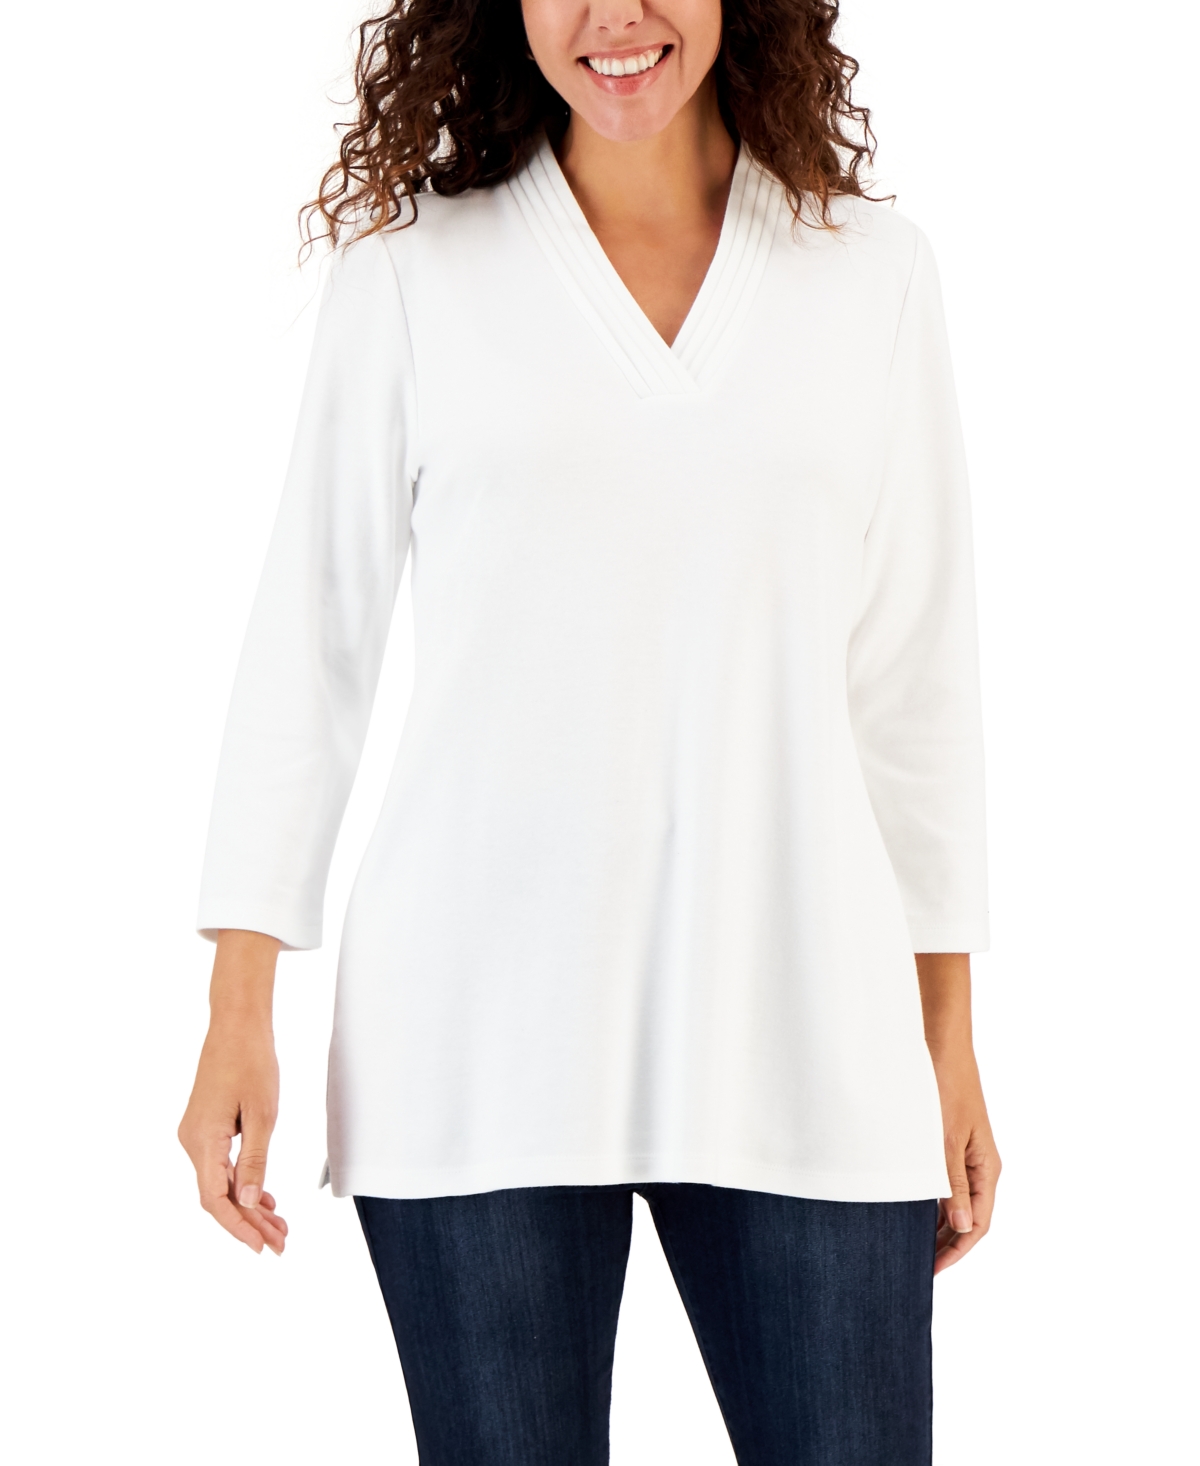 Women's Cotton Tunic Top, Created for Macy's - Bright White